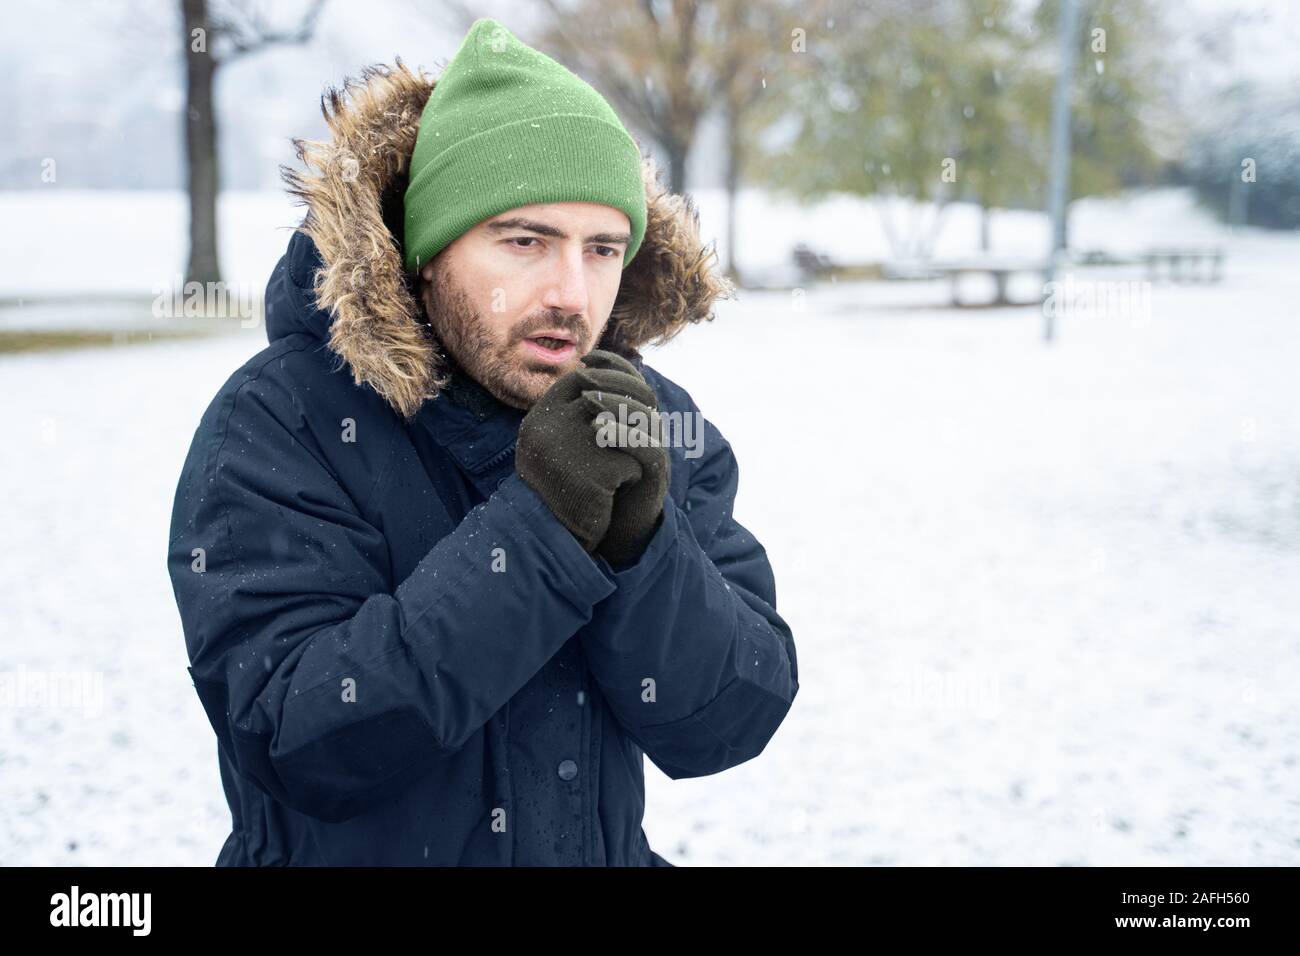 Man wearing clothes and beanie in snow Stock Photo -